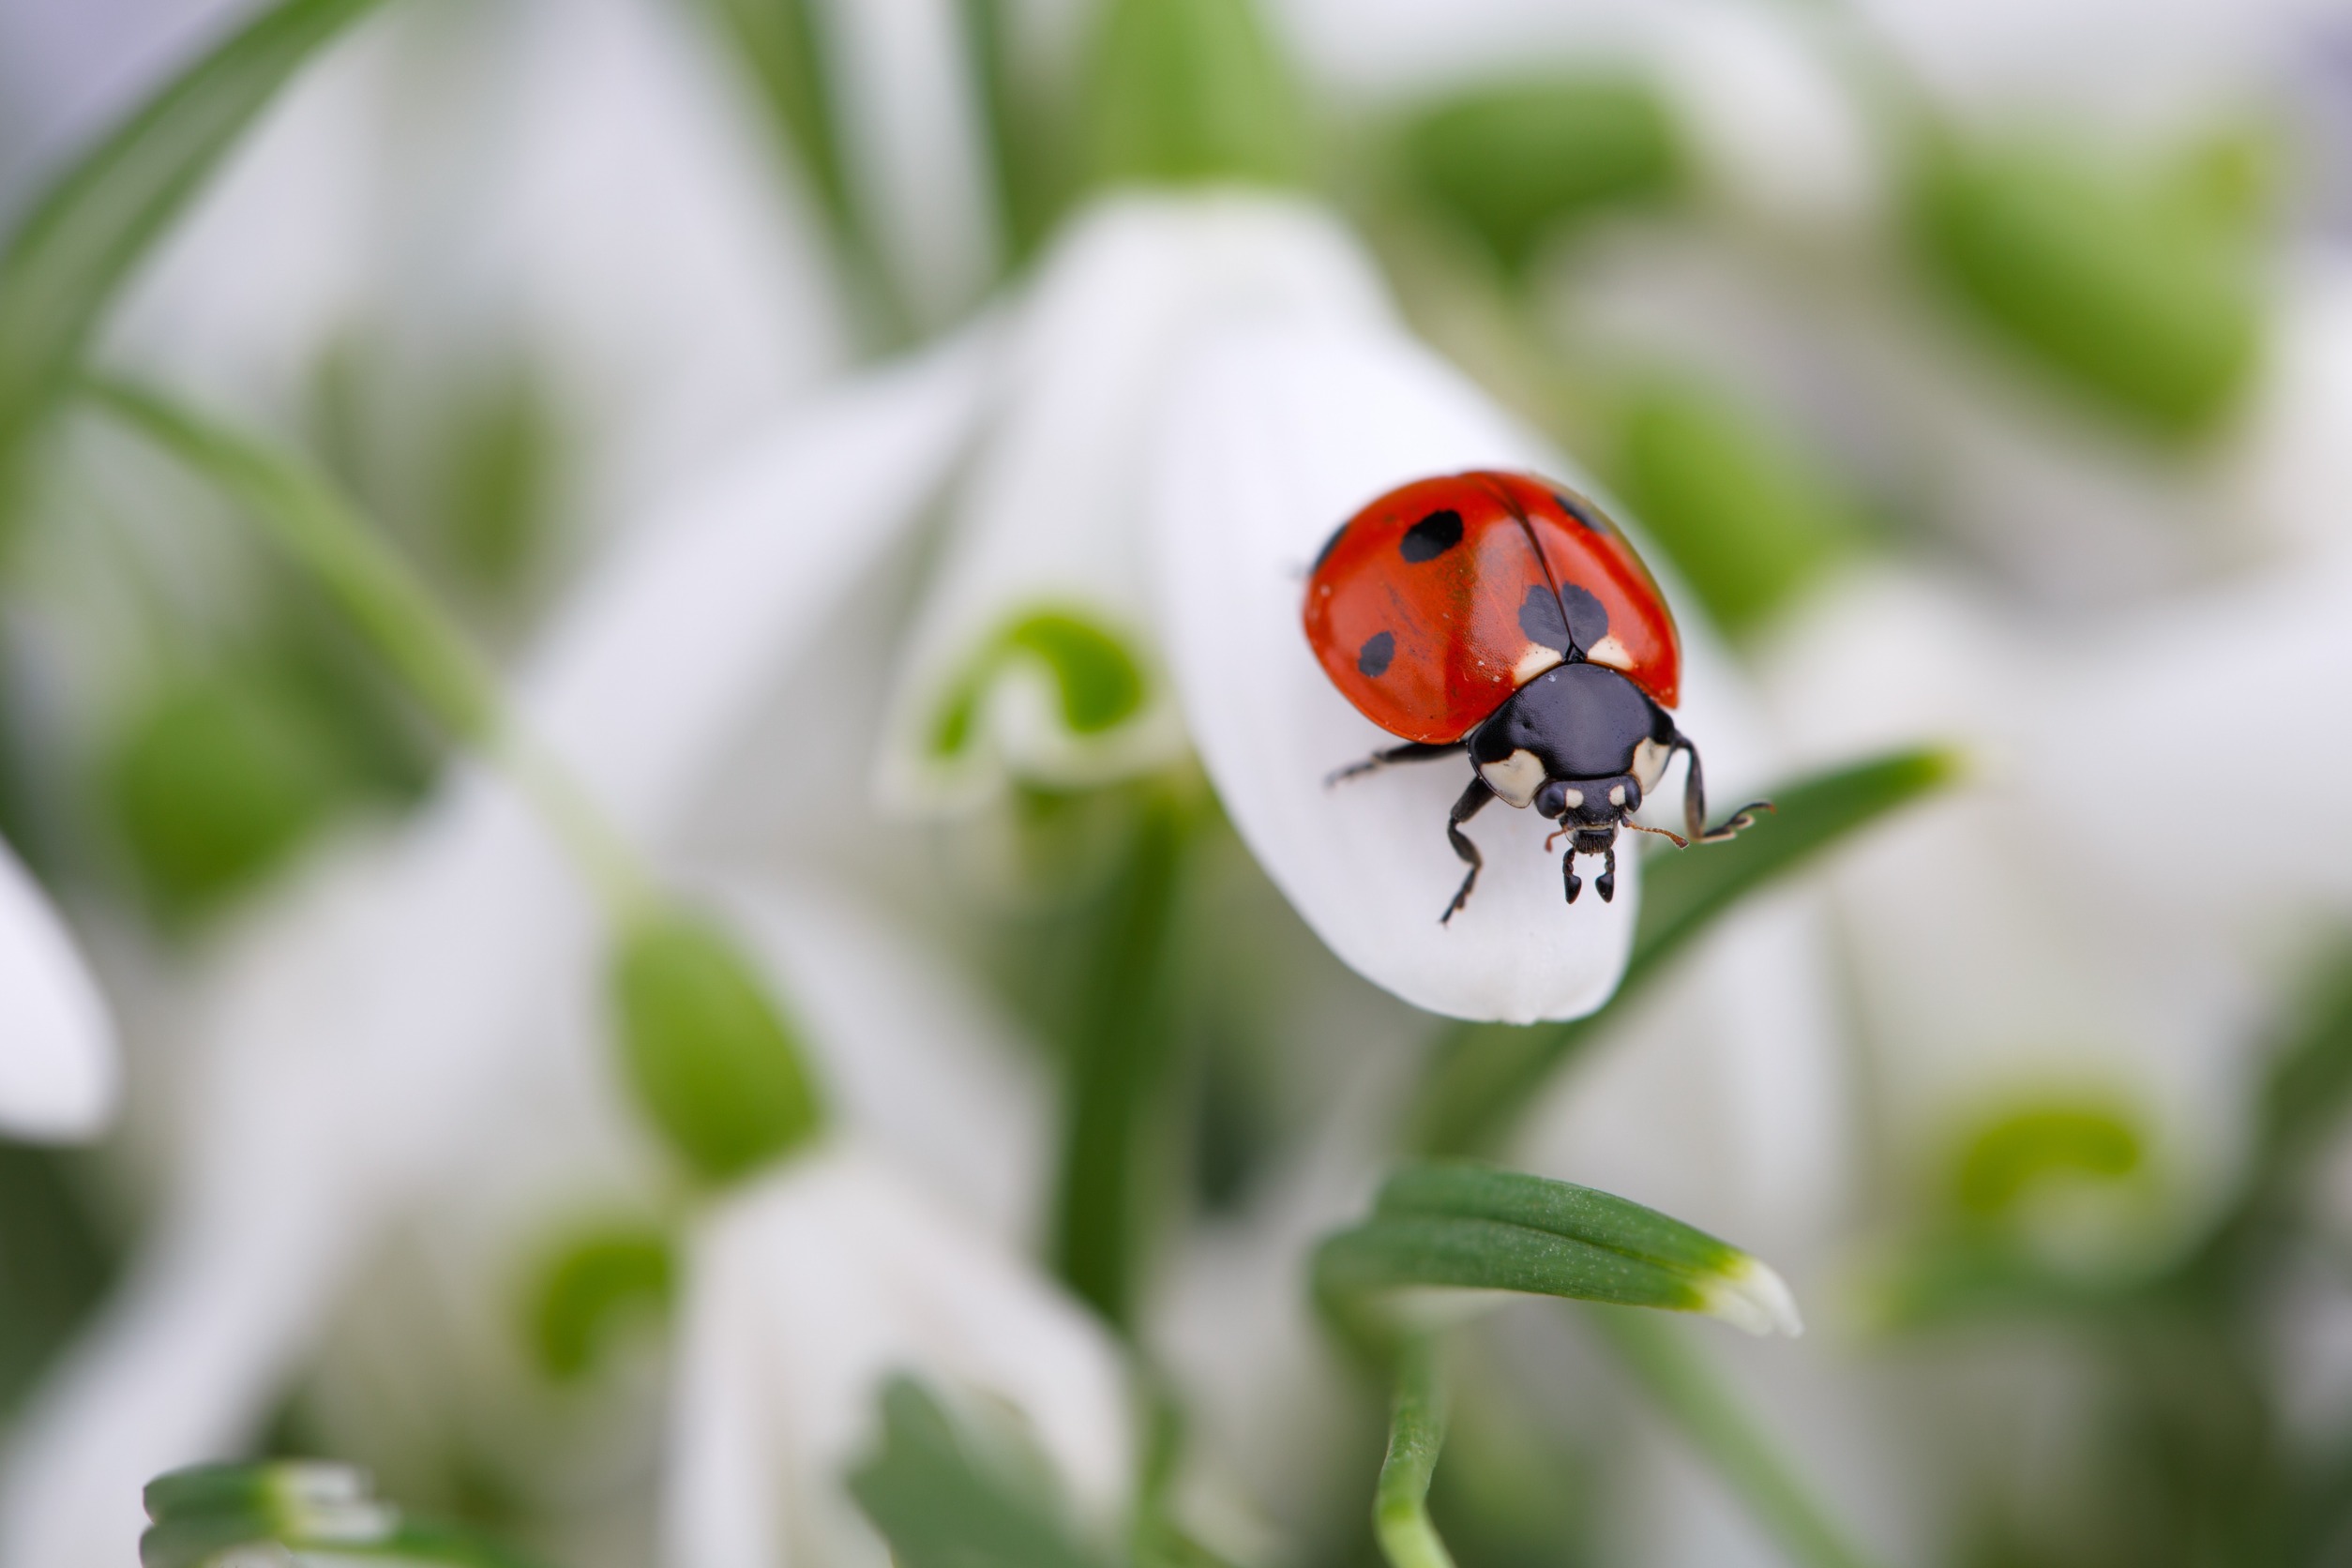 Lady Bugs for pest control